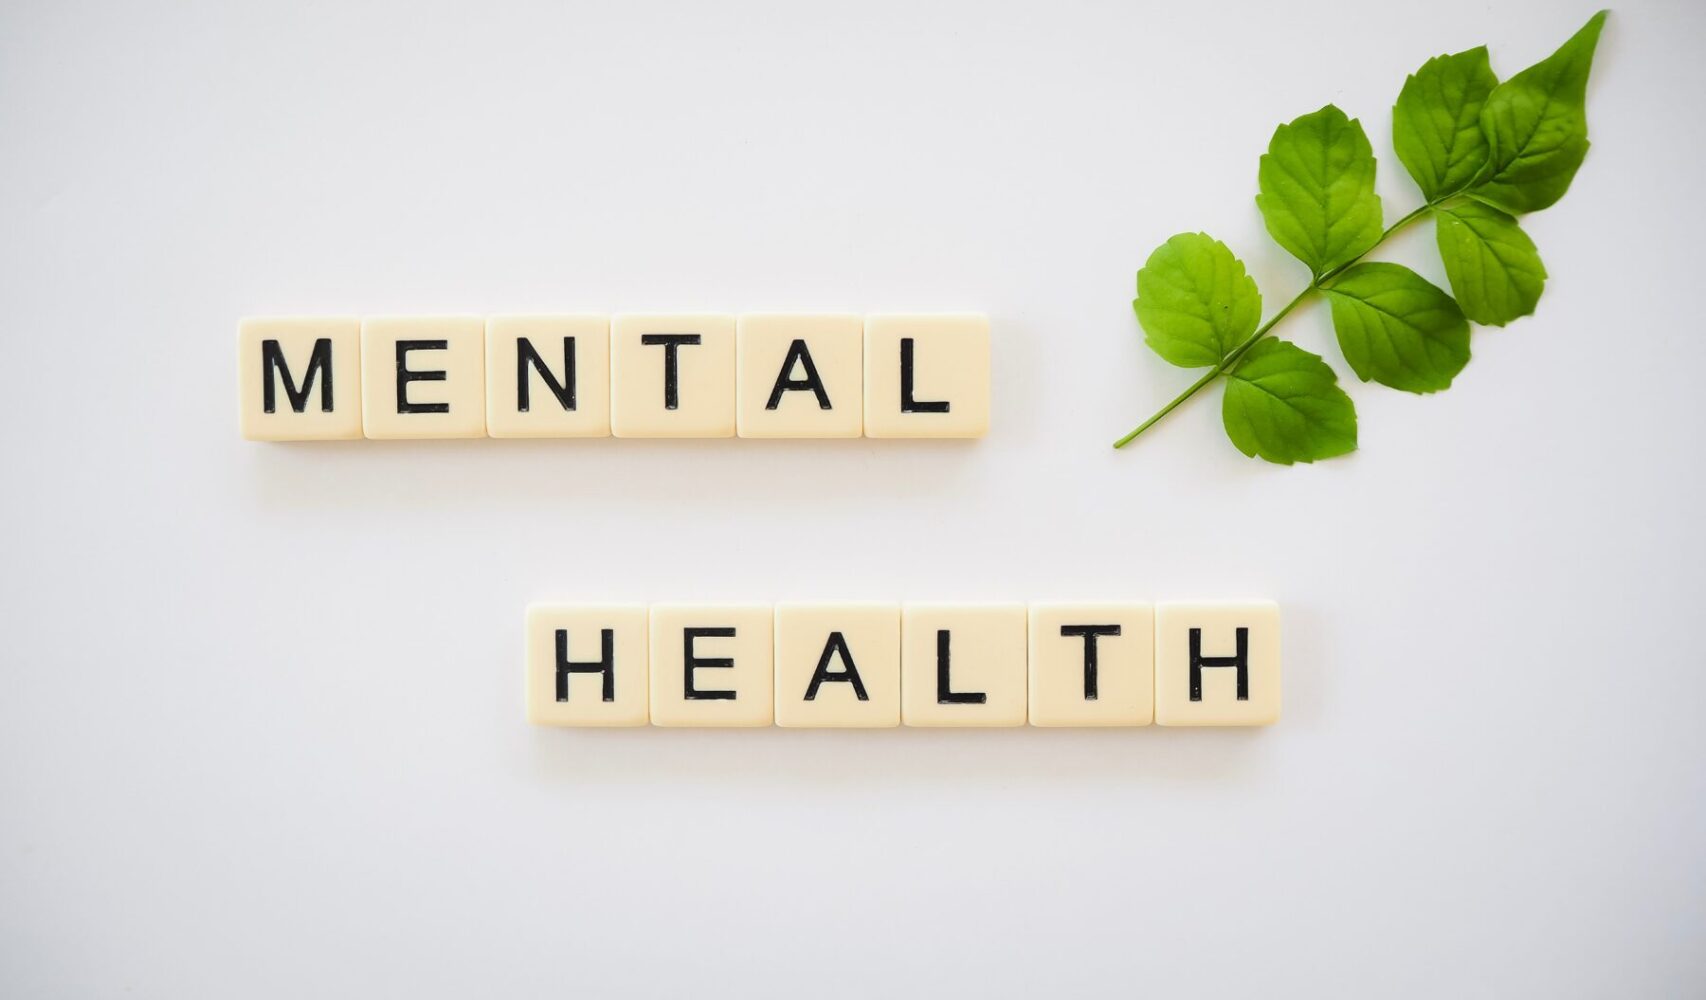 The words "Mental Health" shown on Scrabble tiles